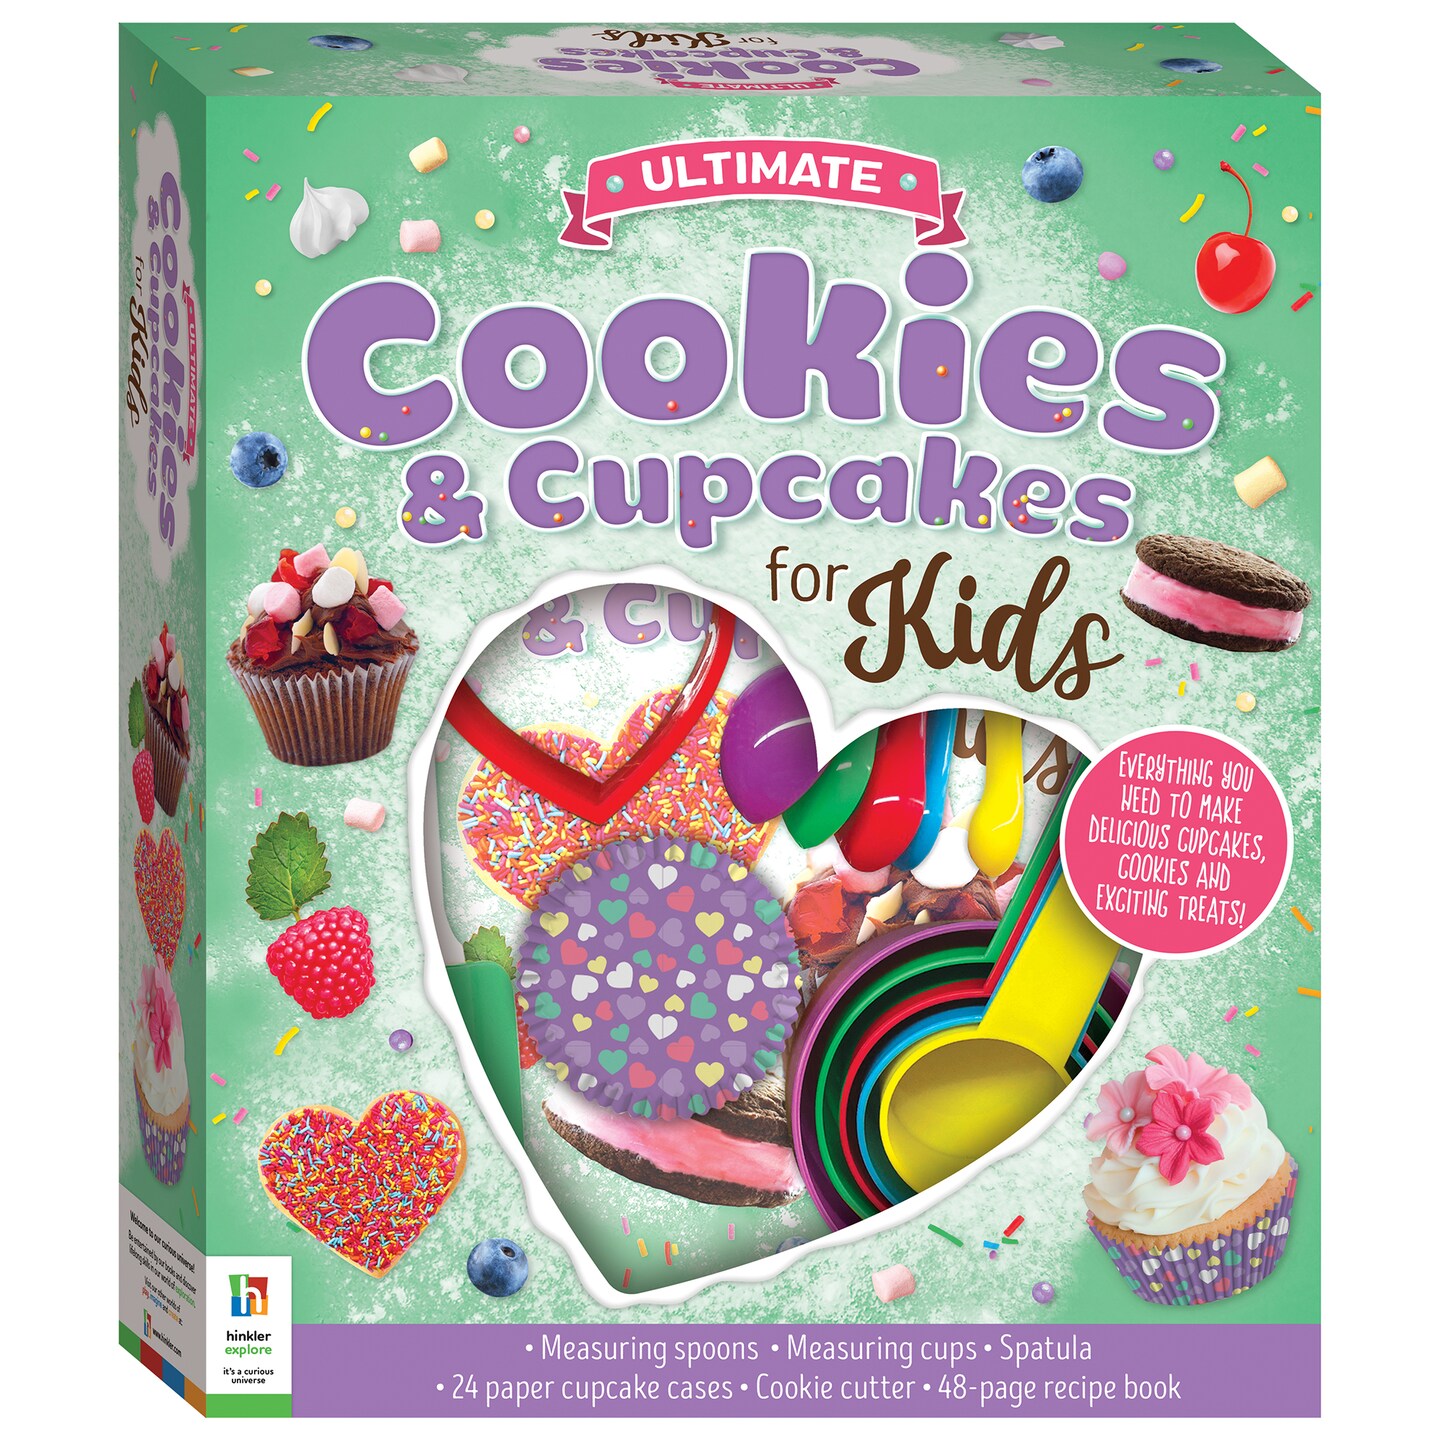 Ultimate Cookie &#x26; Cupcakes for Kids - Cookbooks for Kids - Cooking with Children - Baking Utensils and Guides - Children&#x27;s Hobbies - Learn to Bake Cookies and Cupcakes - Baking for Kids Aged 8 to 12